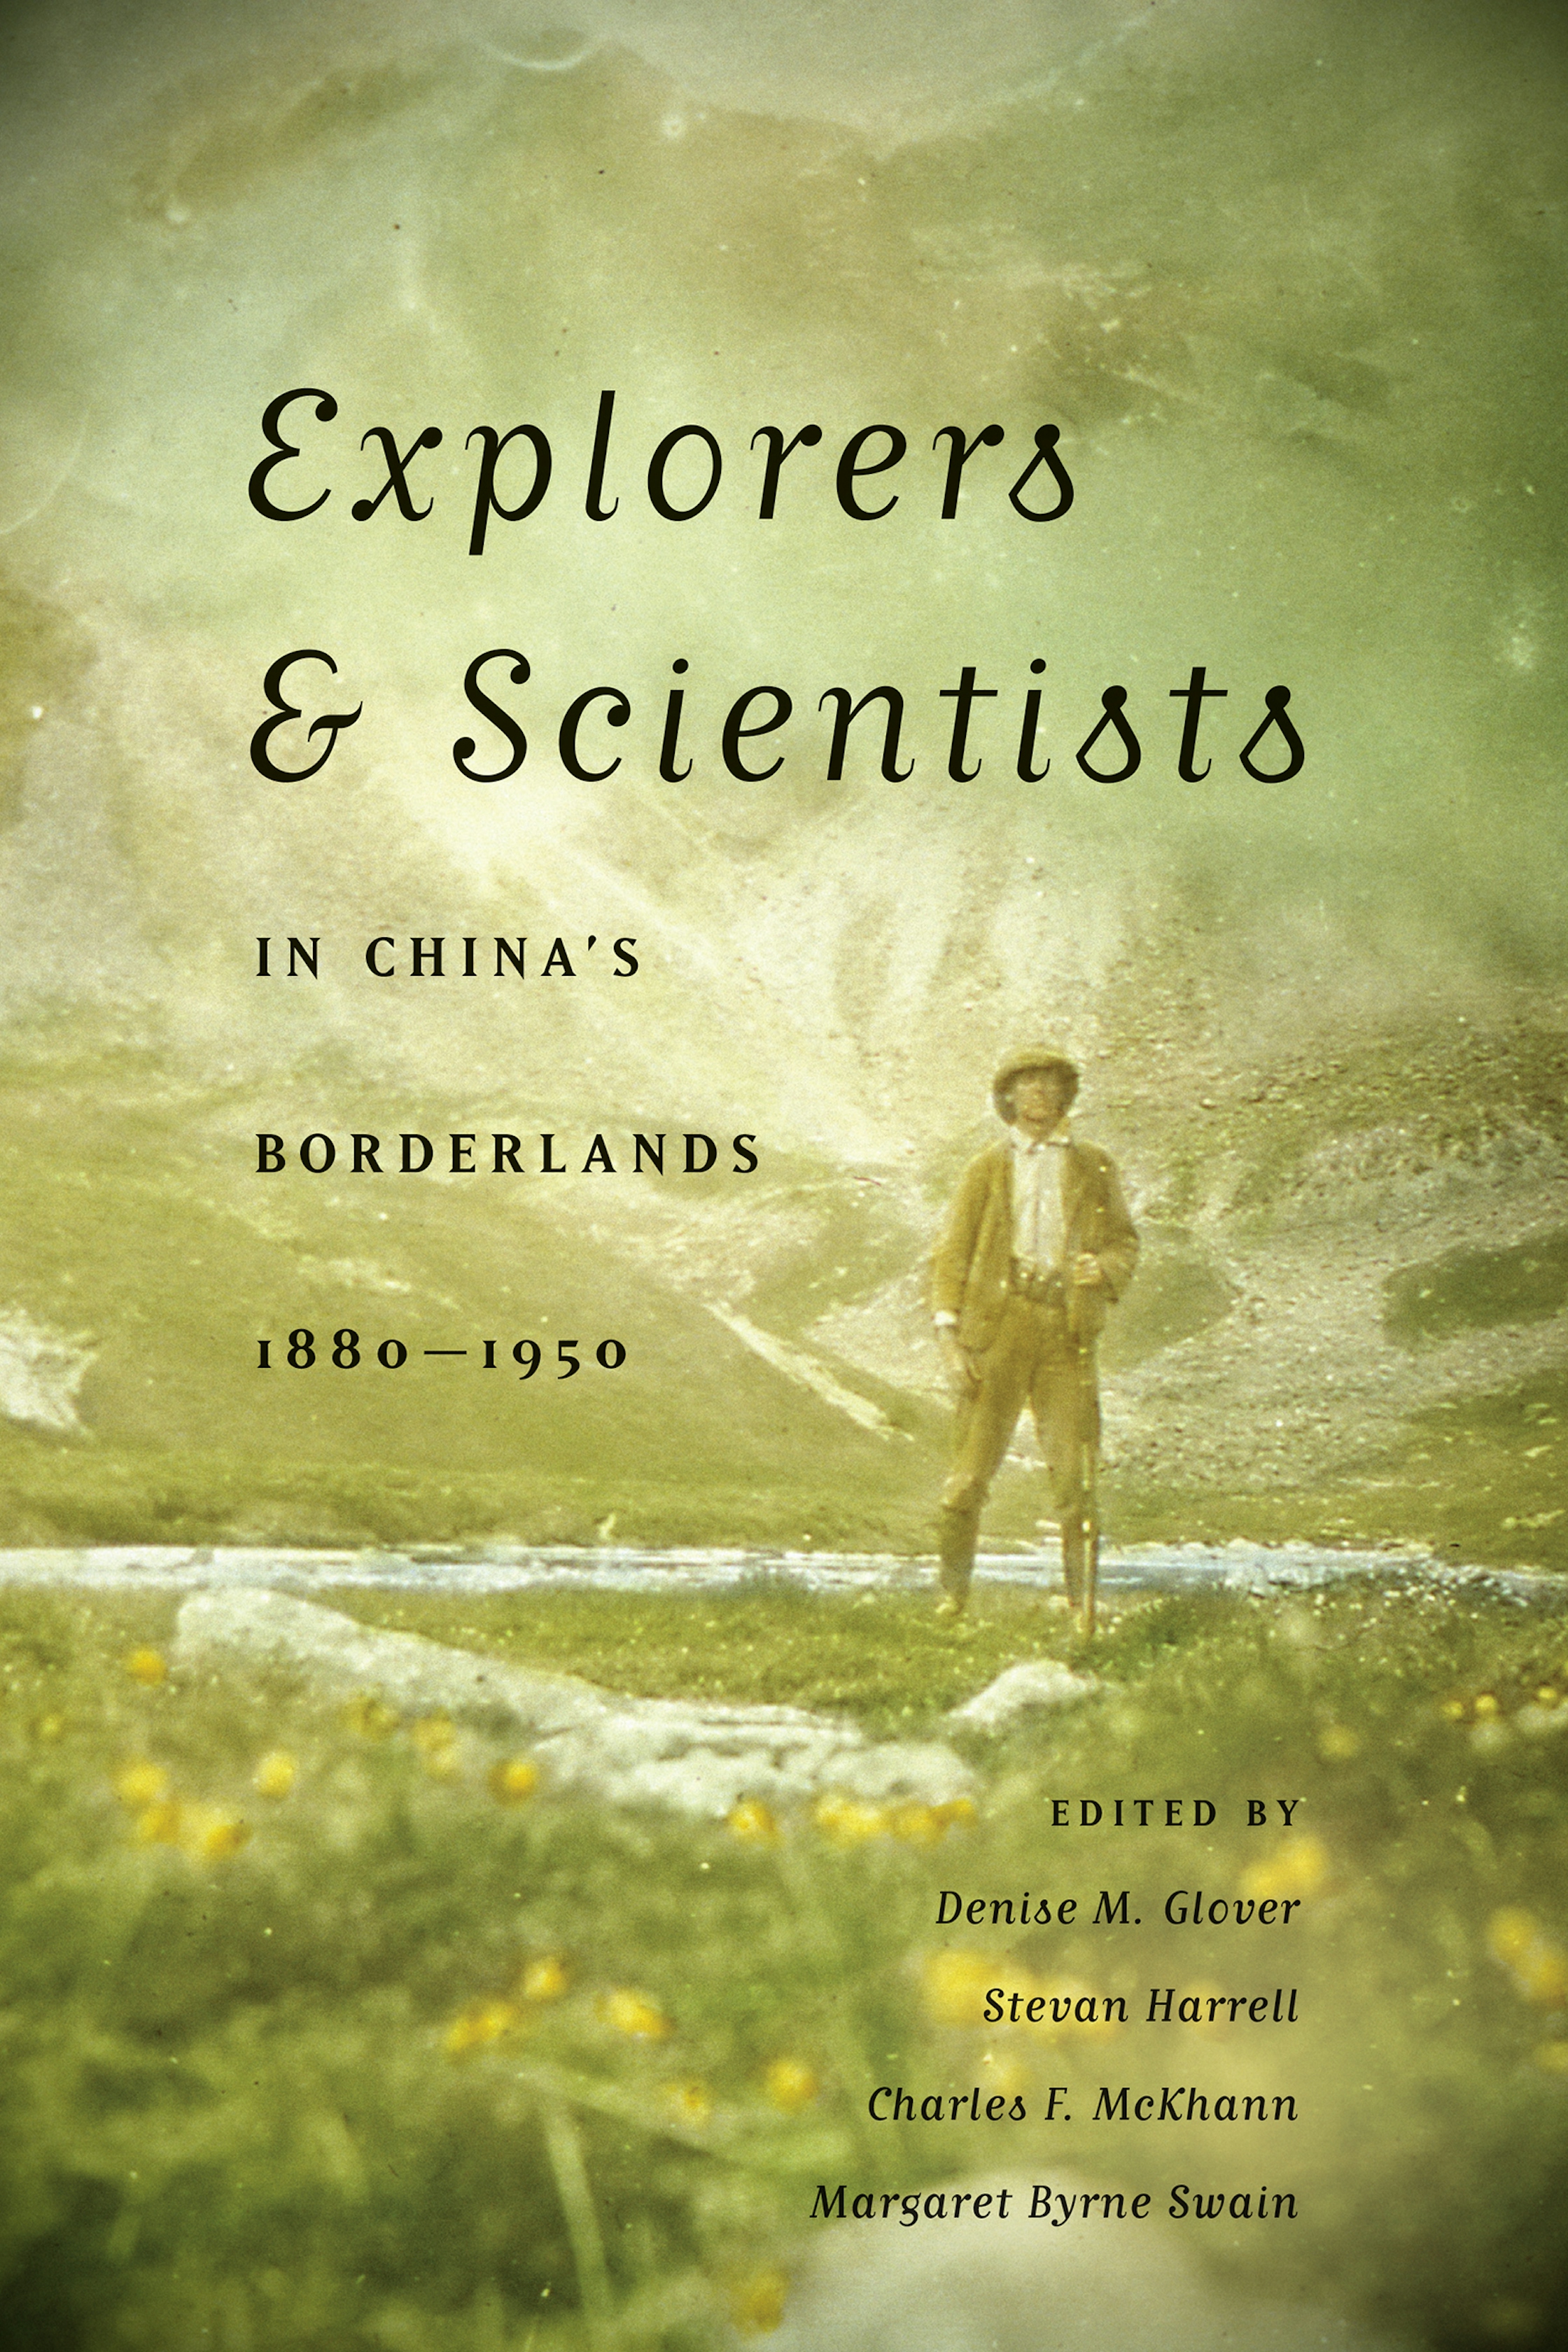 Explorers and Scientists in China